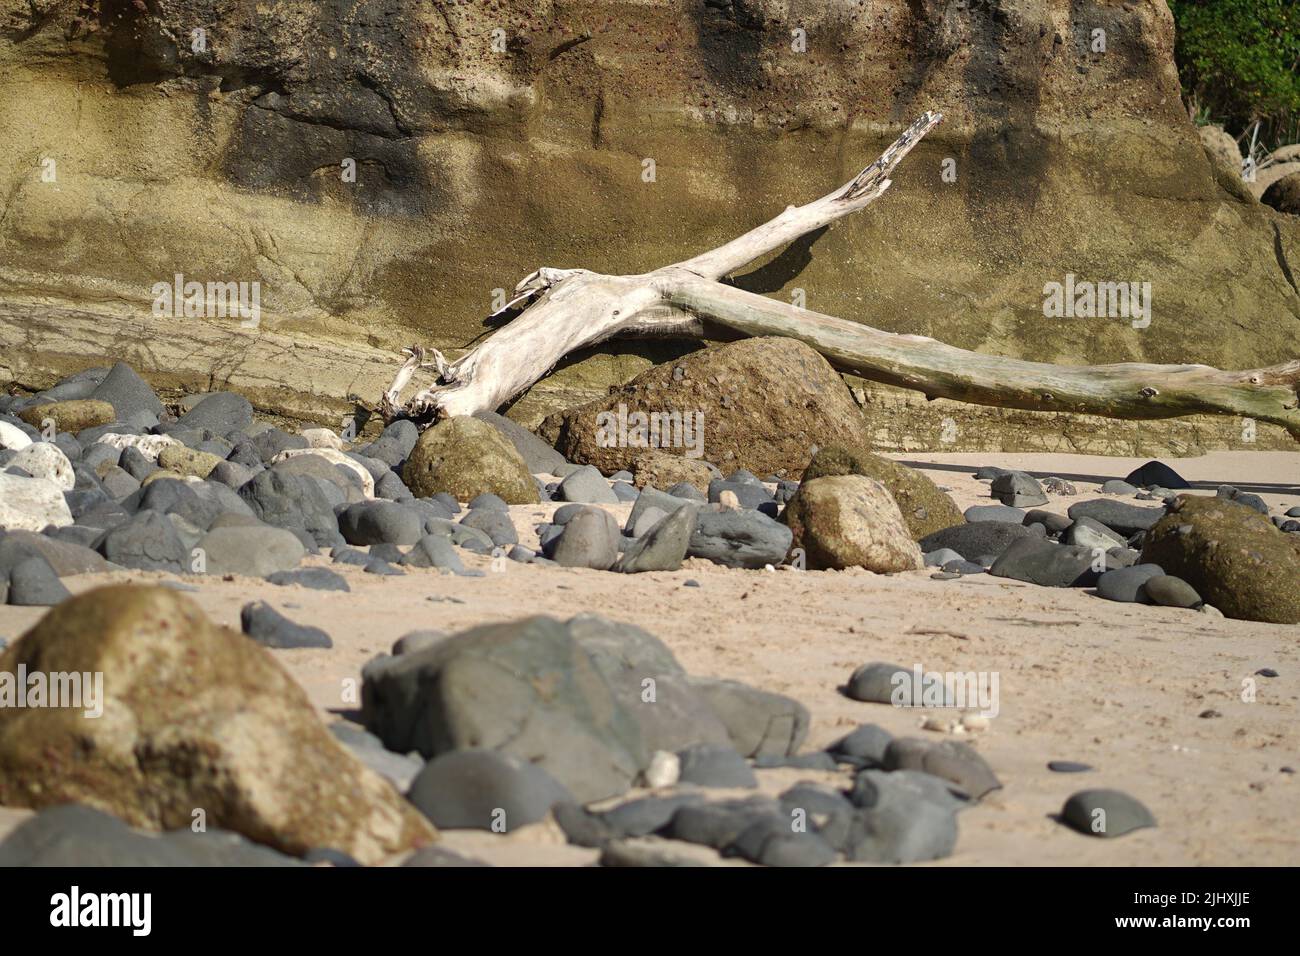 The driftwood and large pebbles near the cliff on sandy beach Stock Photo